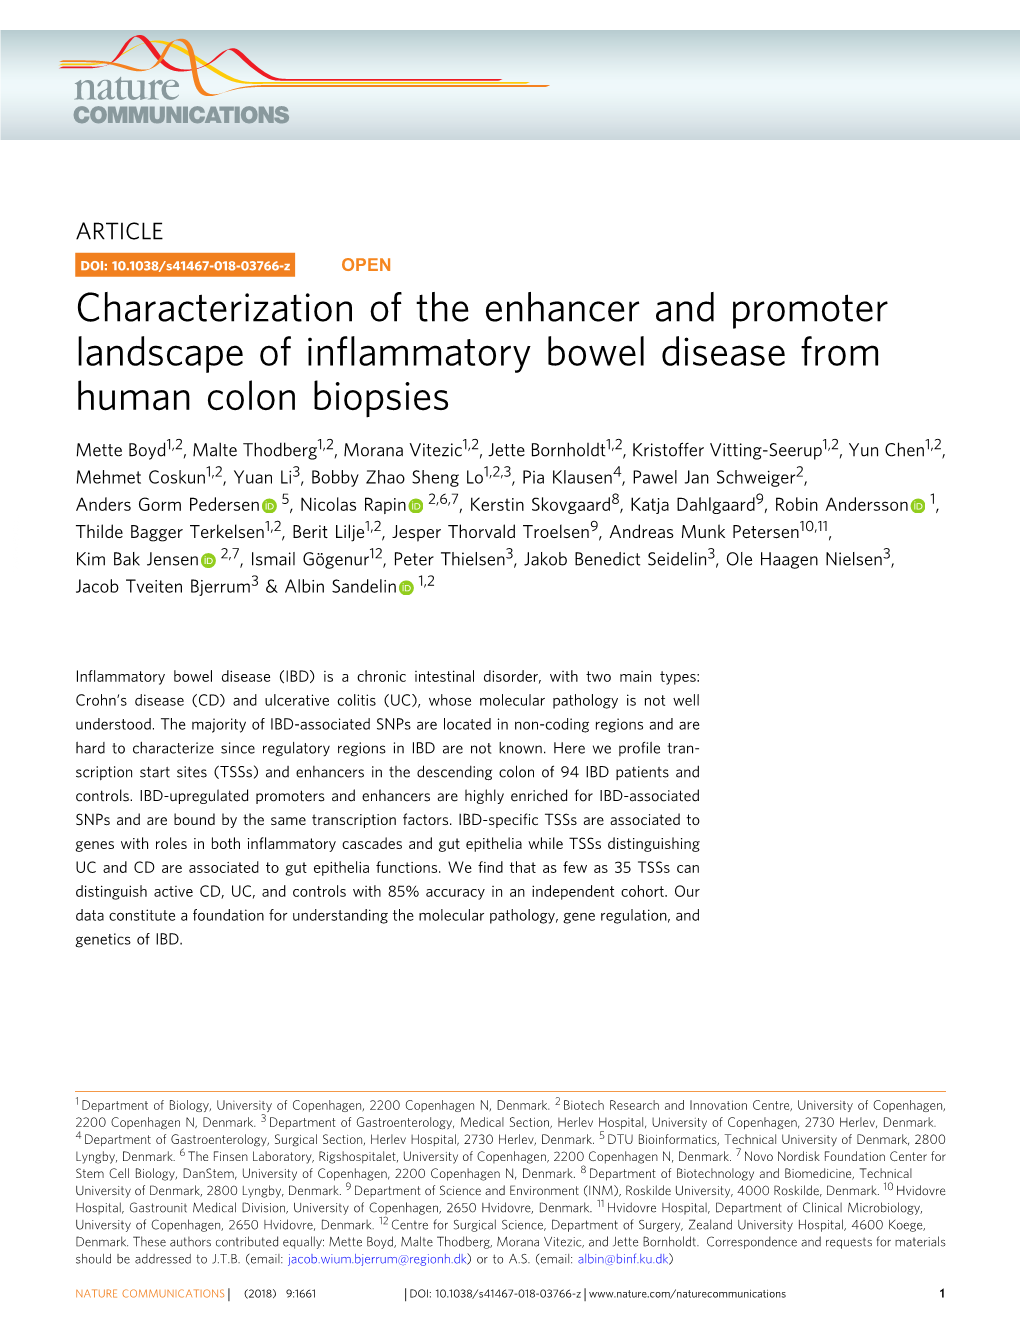 Characterization of the Enhancer and Promoter Landscape of Inﬂammatory Bowel Disease from Human Colon Biopsies